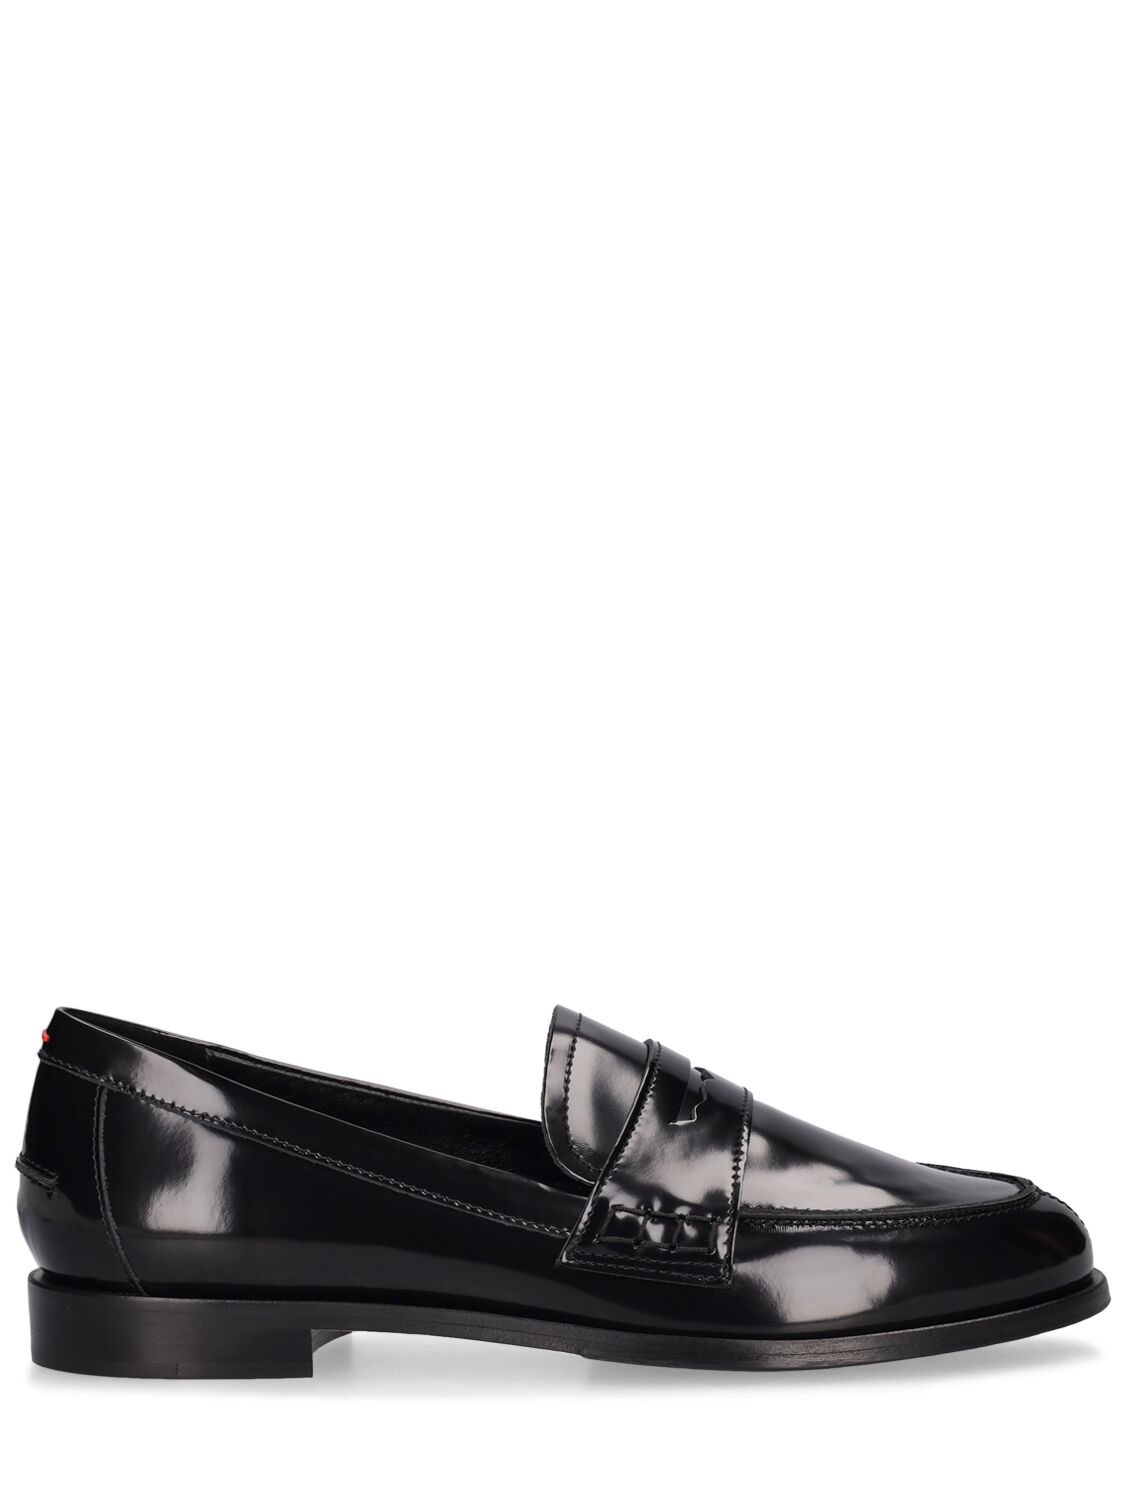 15mm Oscar Polido Leather Loafers